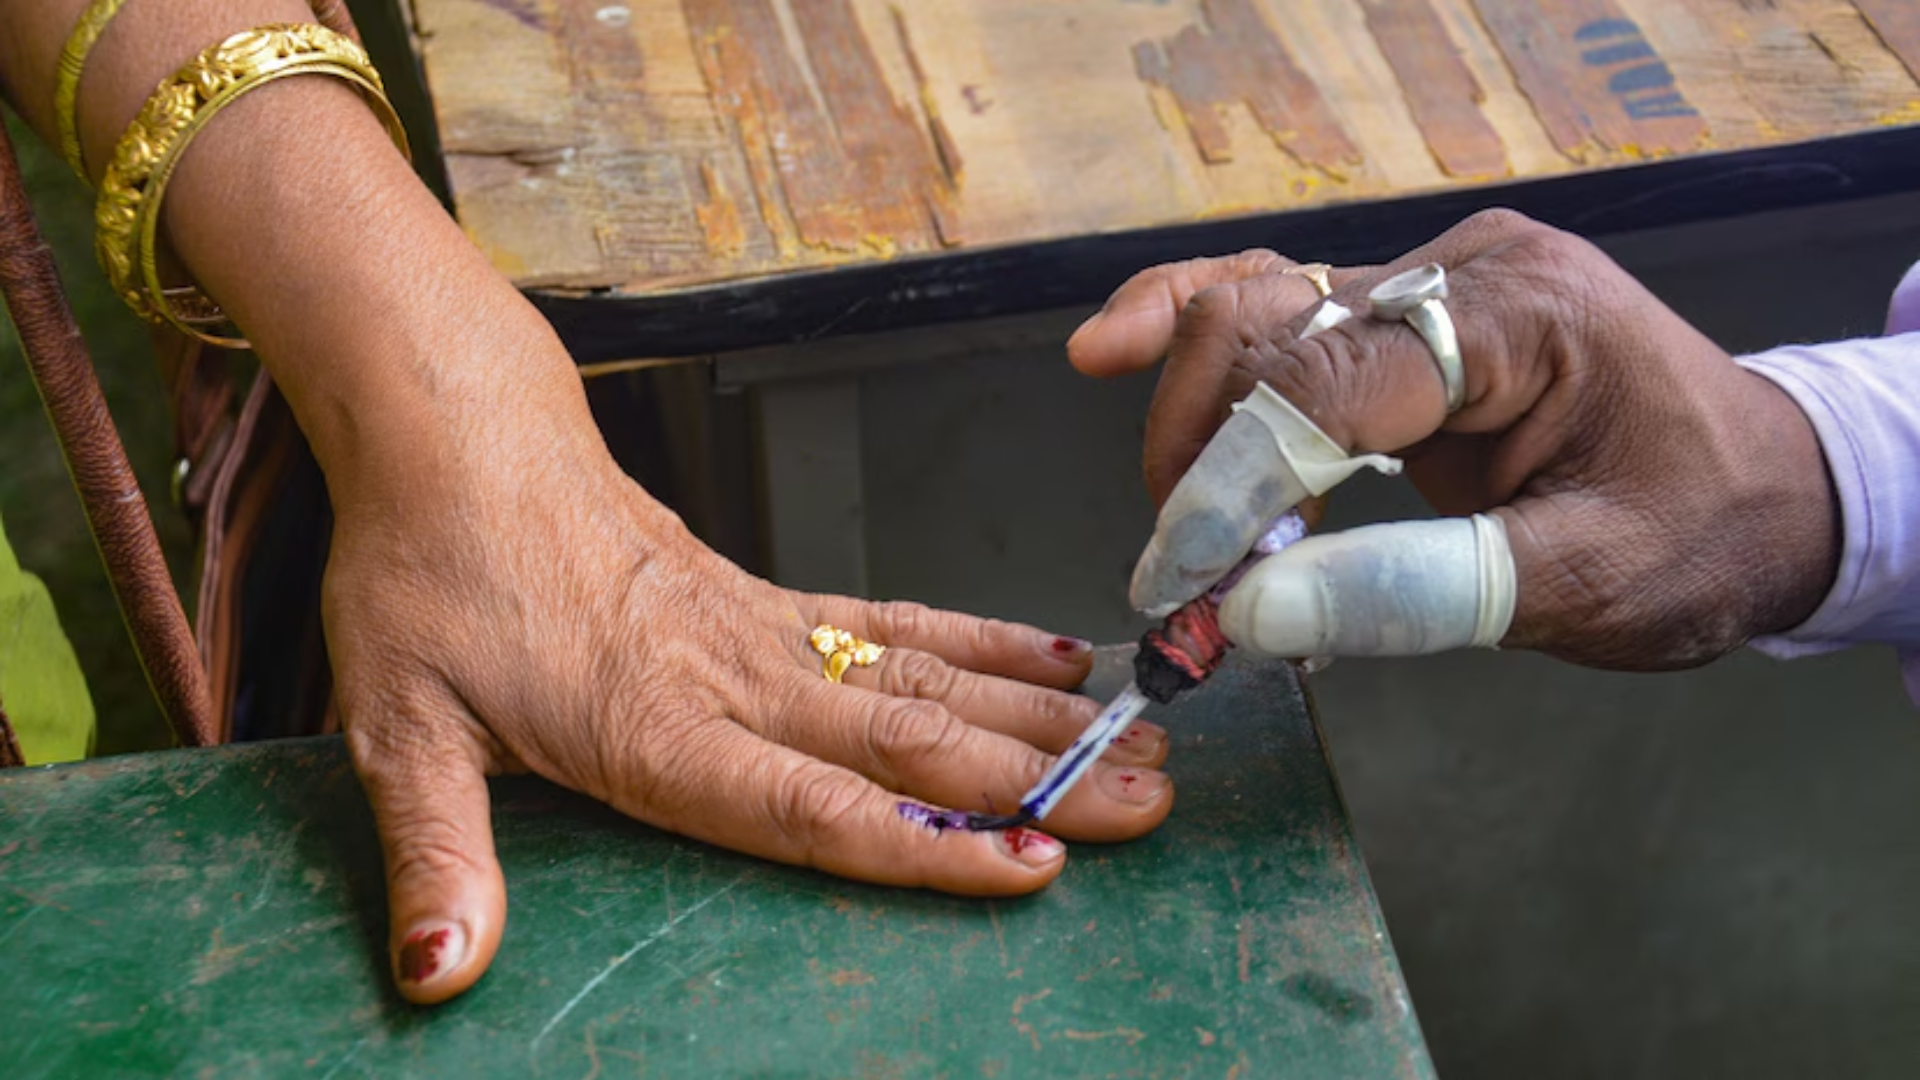 Election Commission Schedules Repolling For Barasat And Mathurapur In West Bengal On Monday